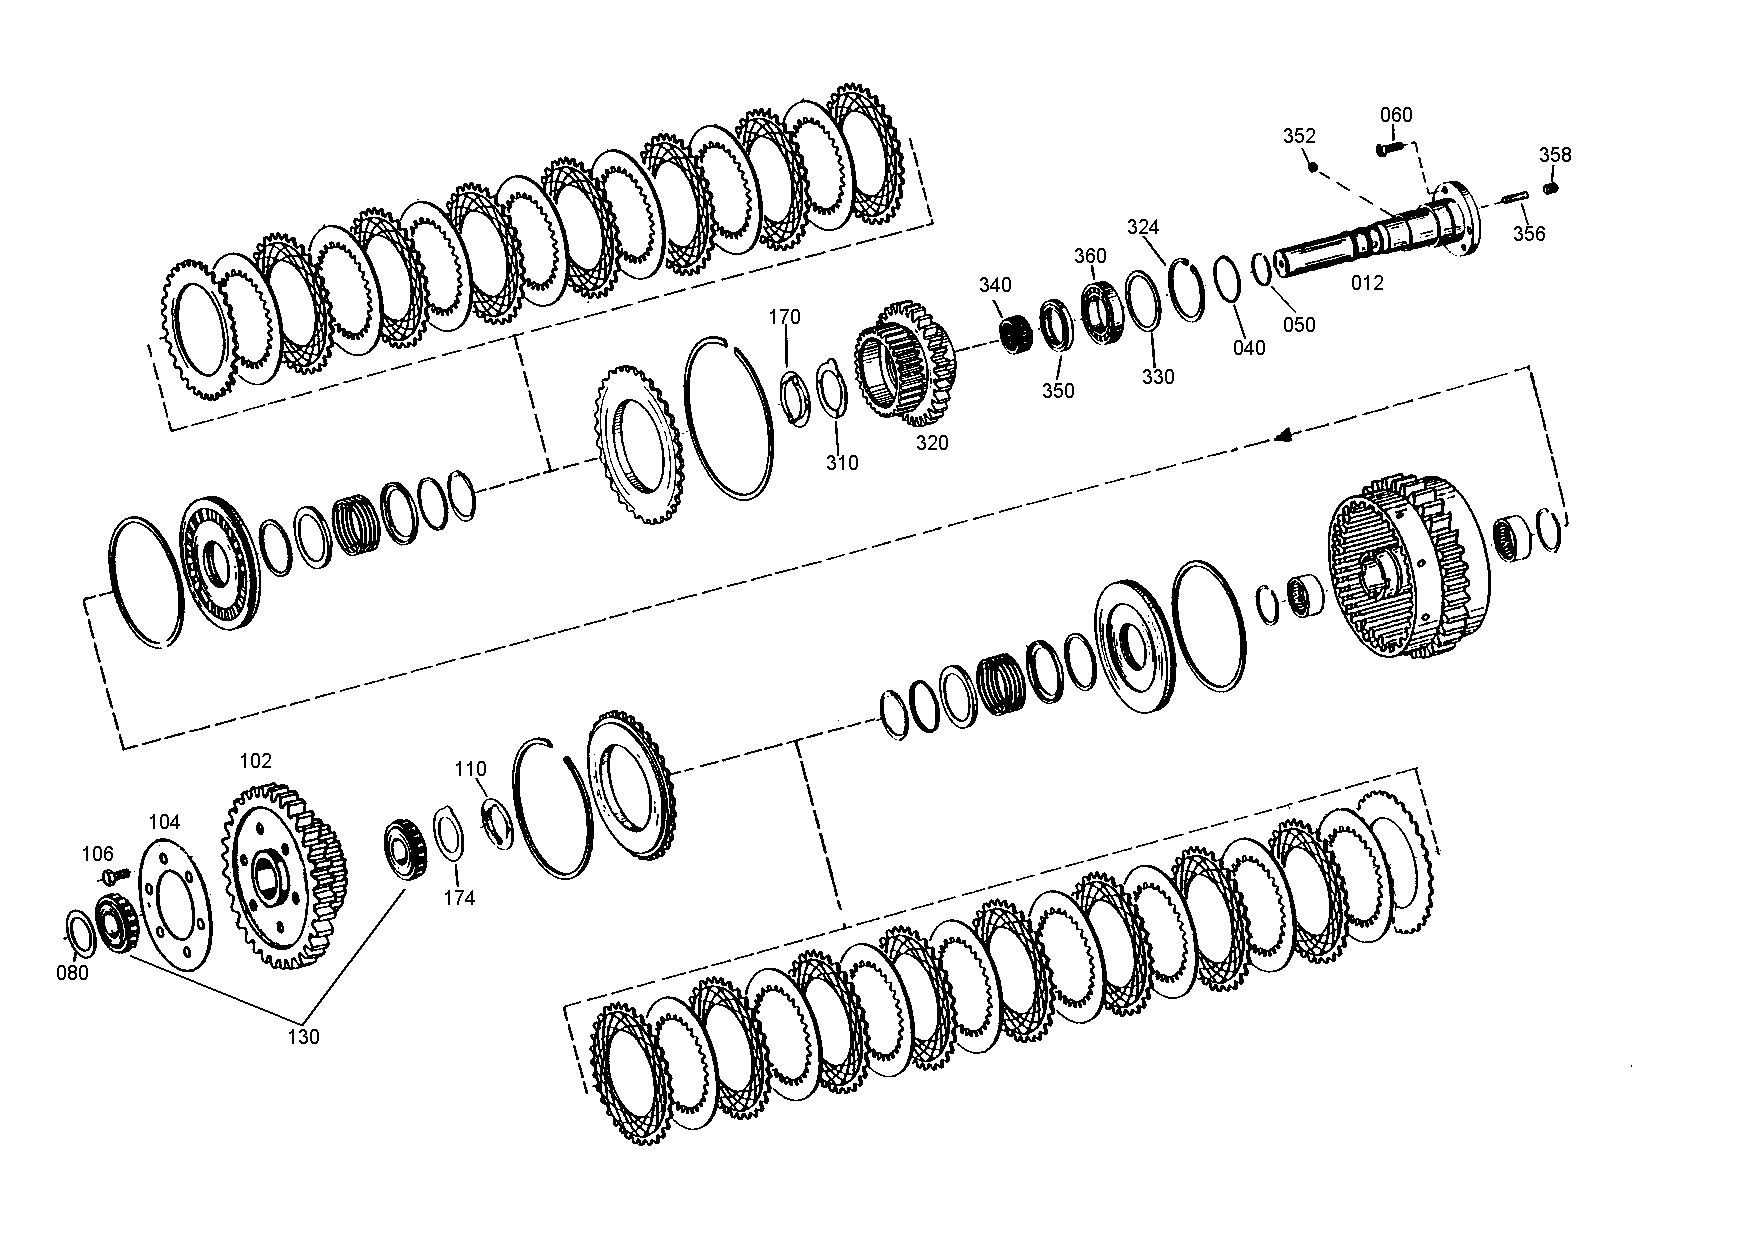 drawing for ATOY OY ATOCO 53C7 - AXLE (figure 2)